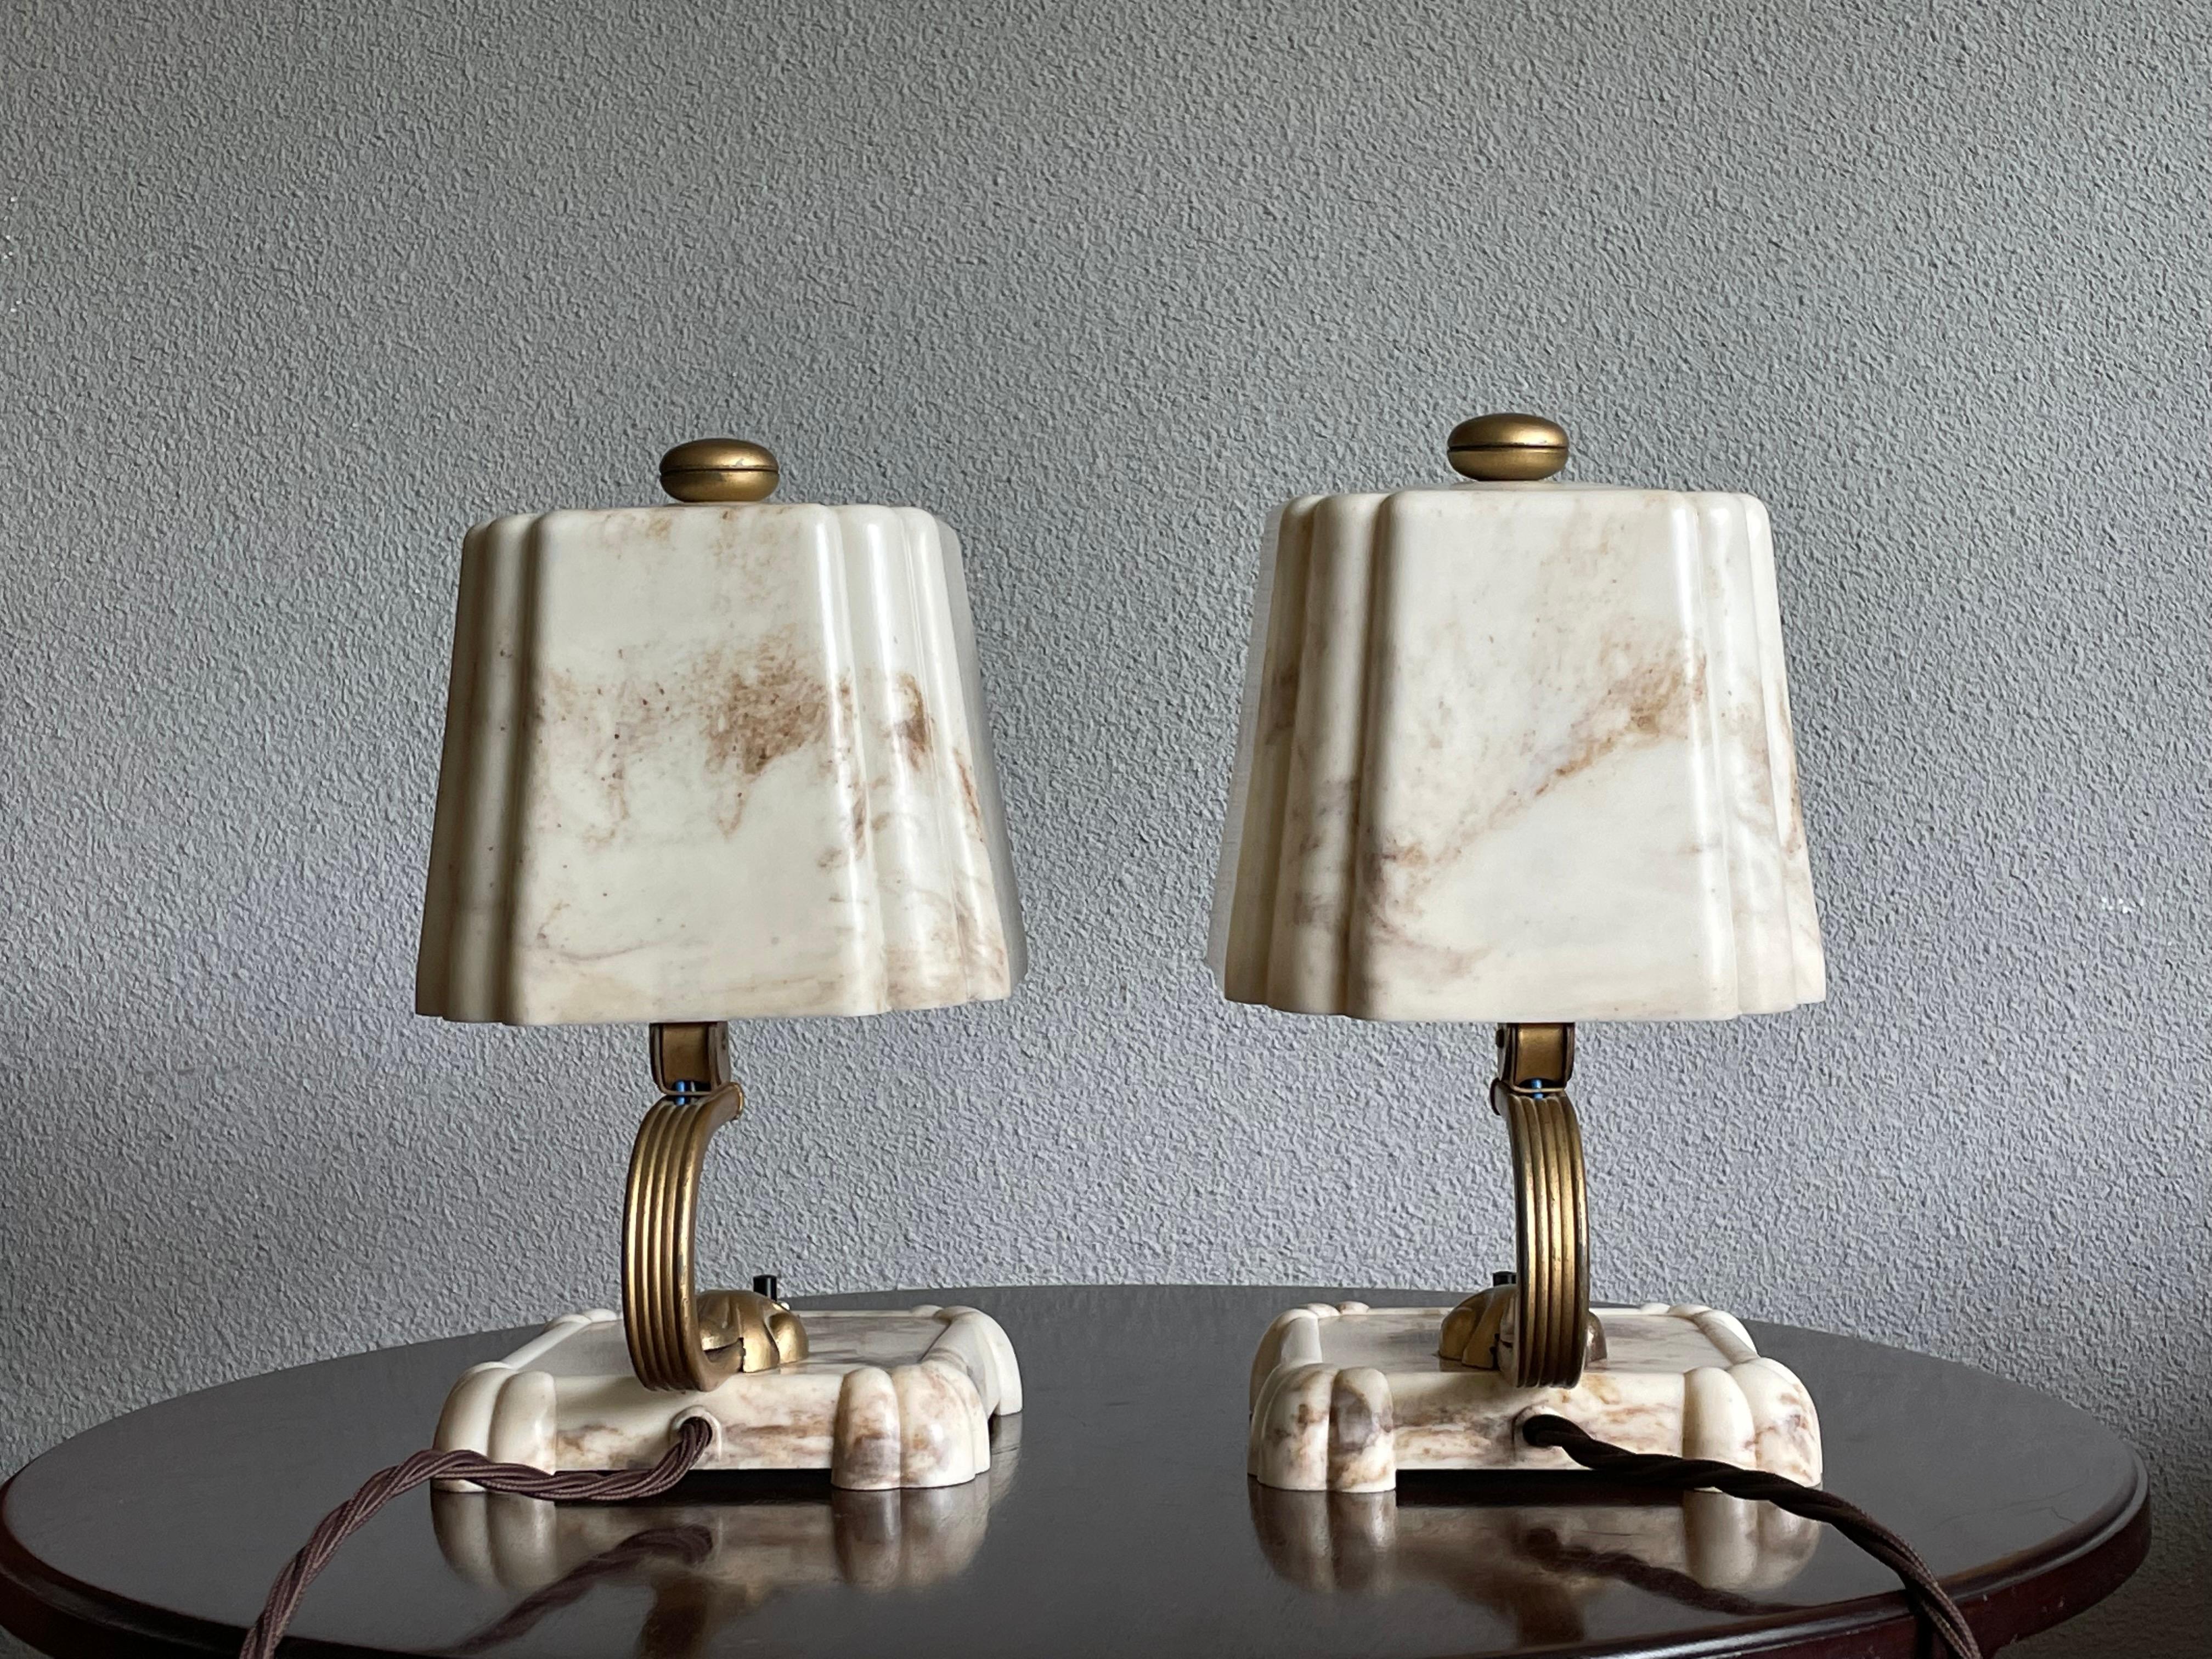 Stunning and Rare Pair of 1930s Art Deco Table or Bedside Lamps Made of Bakelite 10